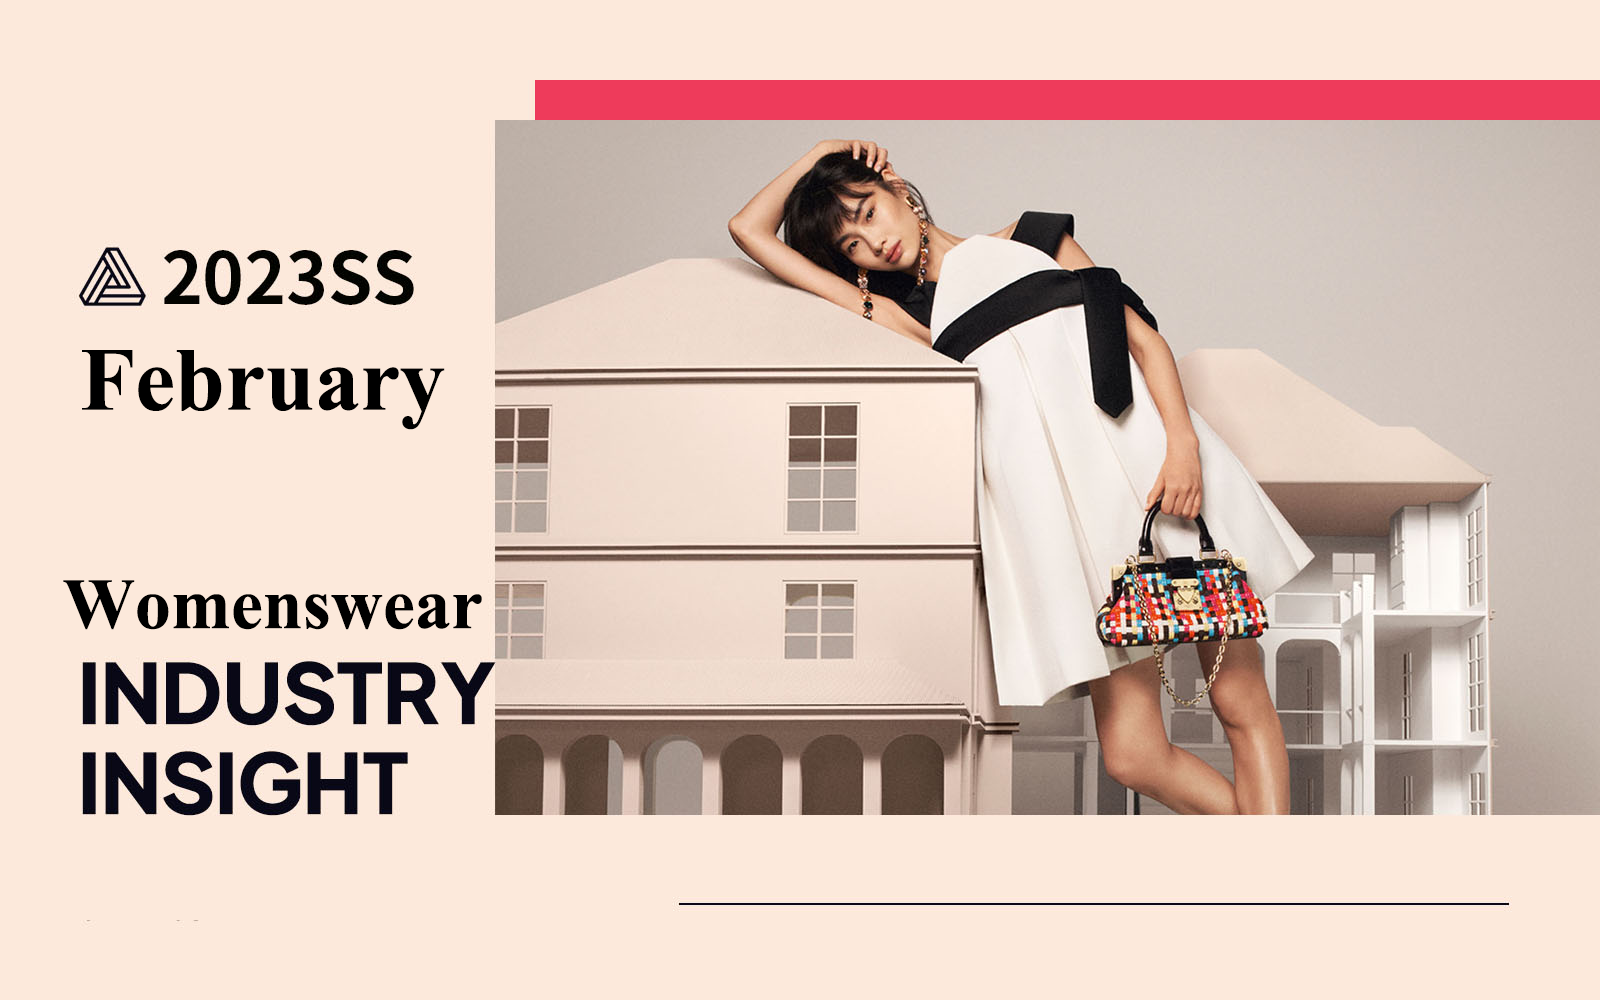 February 2023 -- The Industry Insight of Womenswear